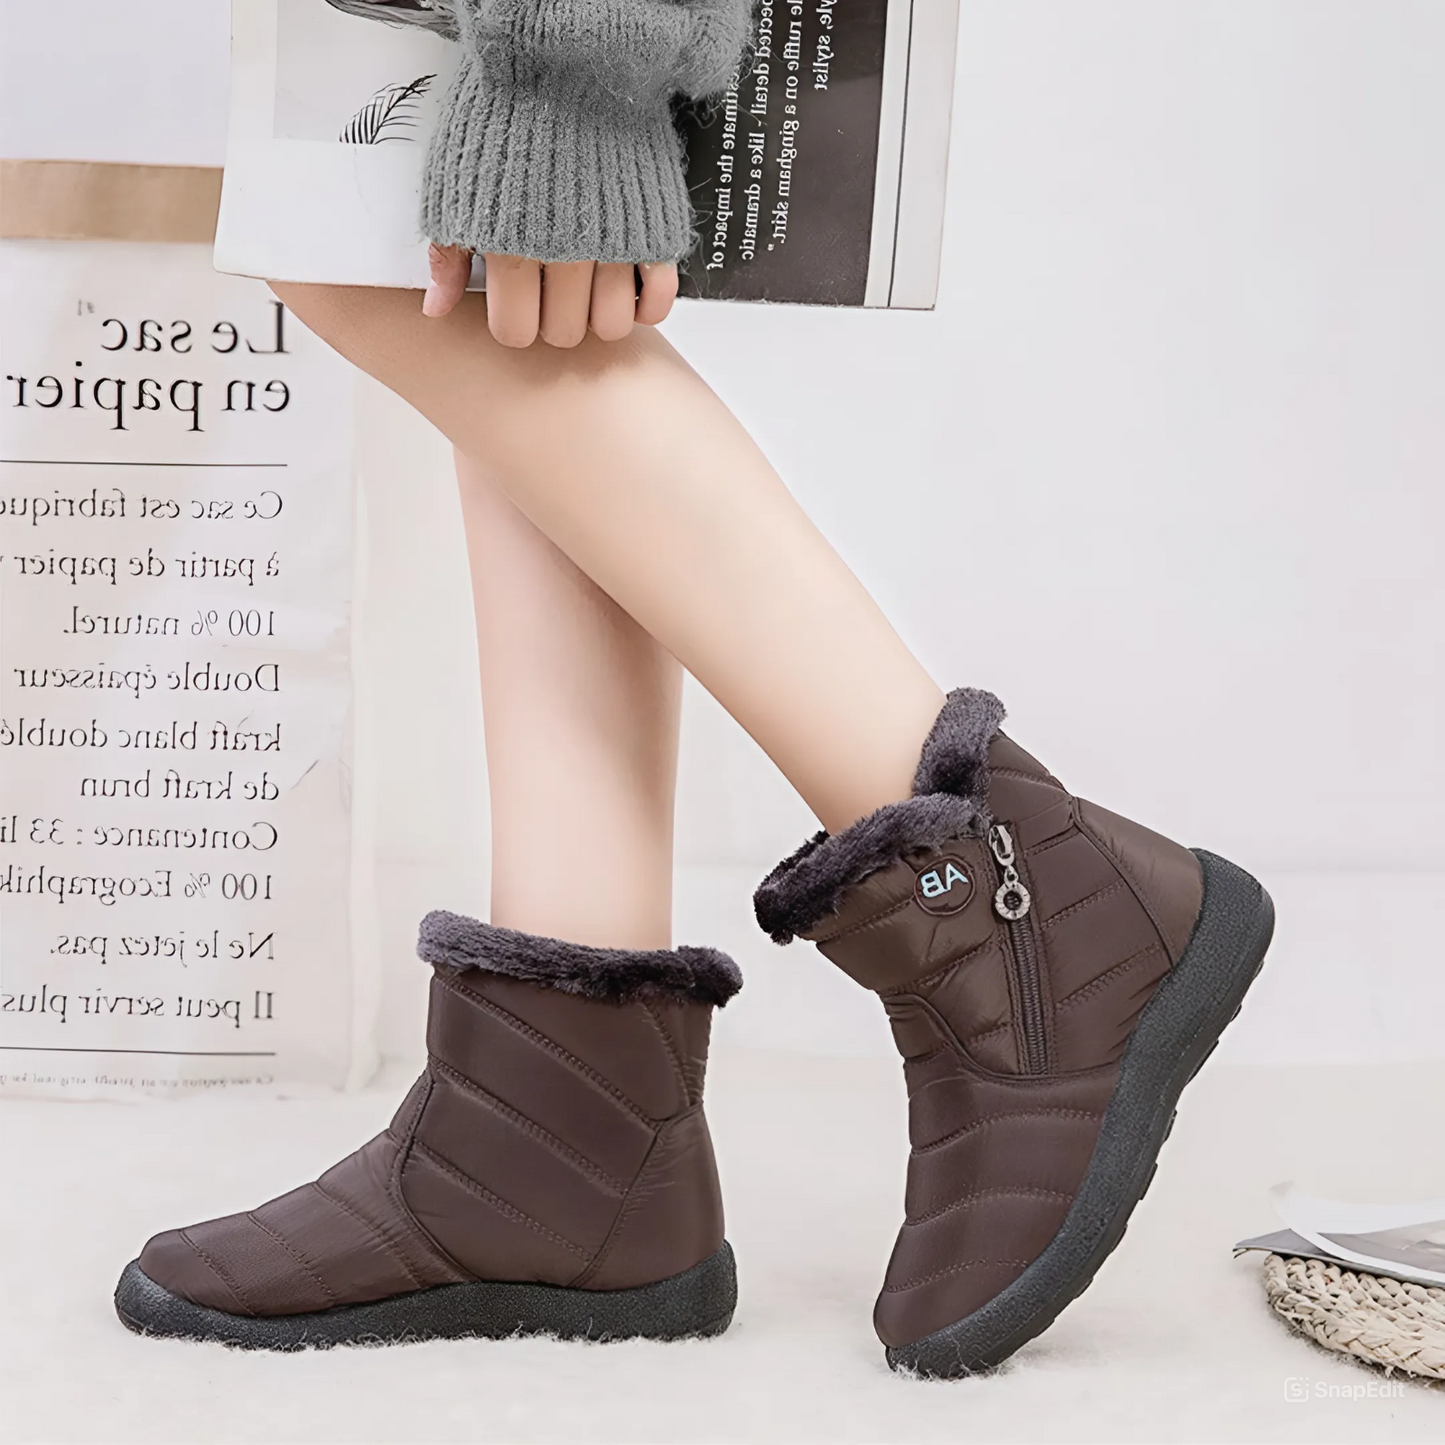 CMF Orthopedic Shoes Waterproof Fur-lined Slip On Winter Women Snow Boots